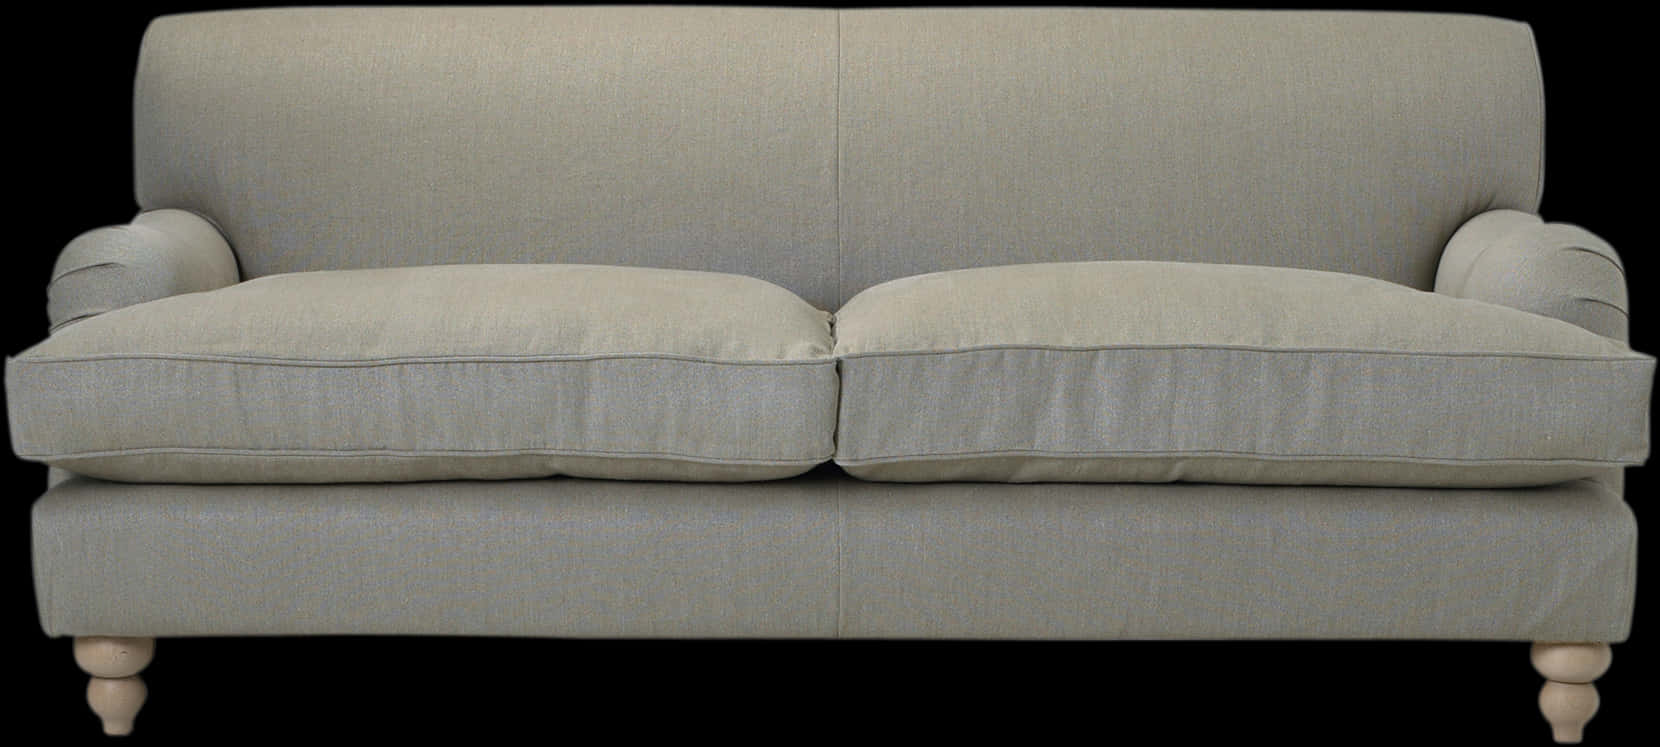 A Close-up Of A Couch